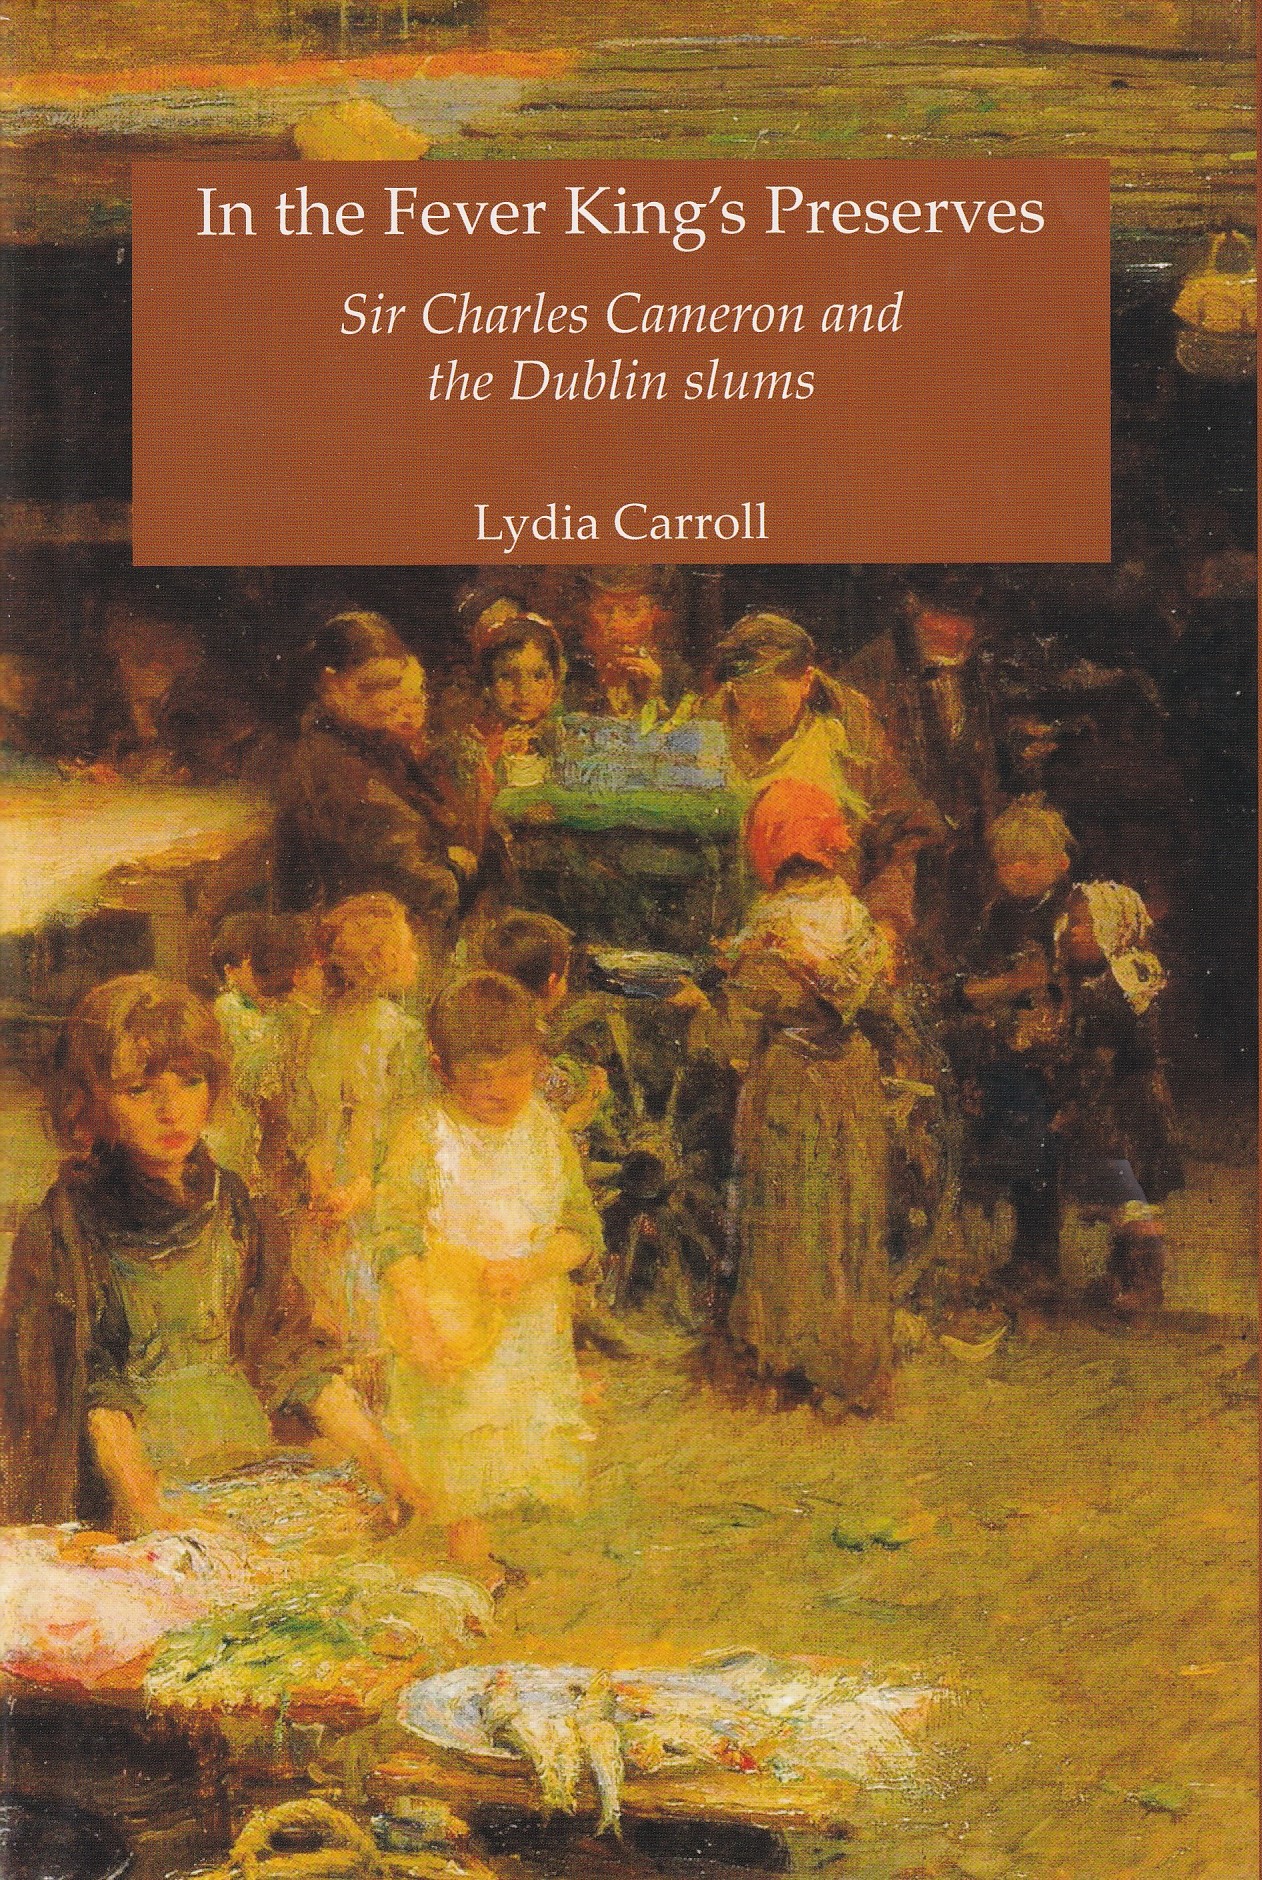 In the Fever King’s Preserves: Sir Charles Cameron and the Dublin slums | Lydia Carroll | Charlie Byrne's